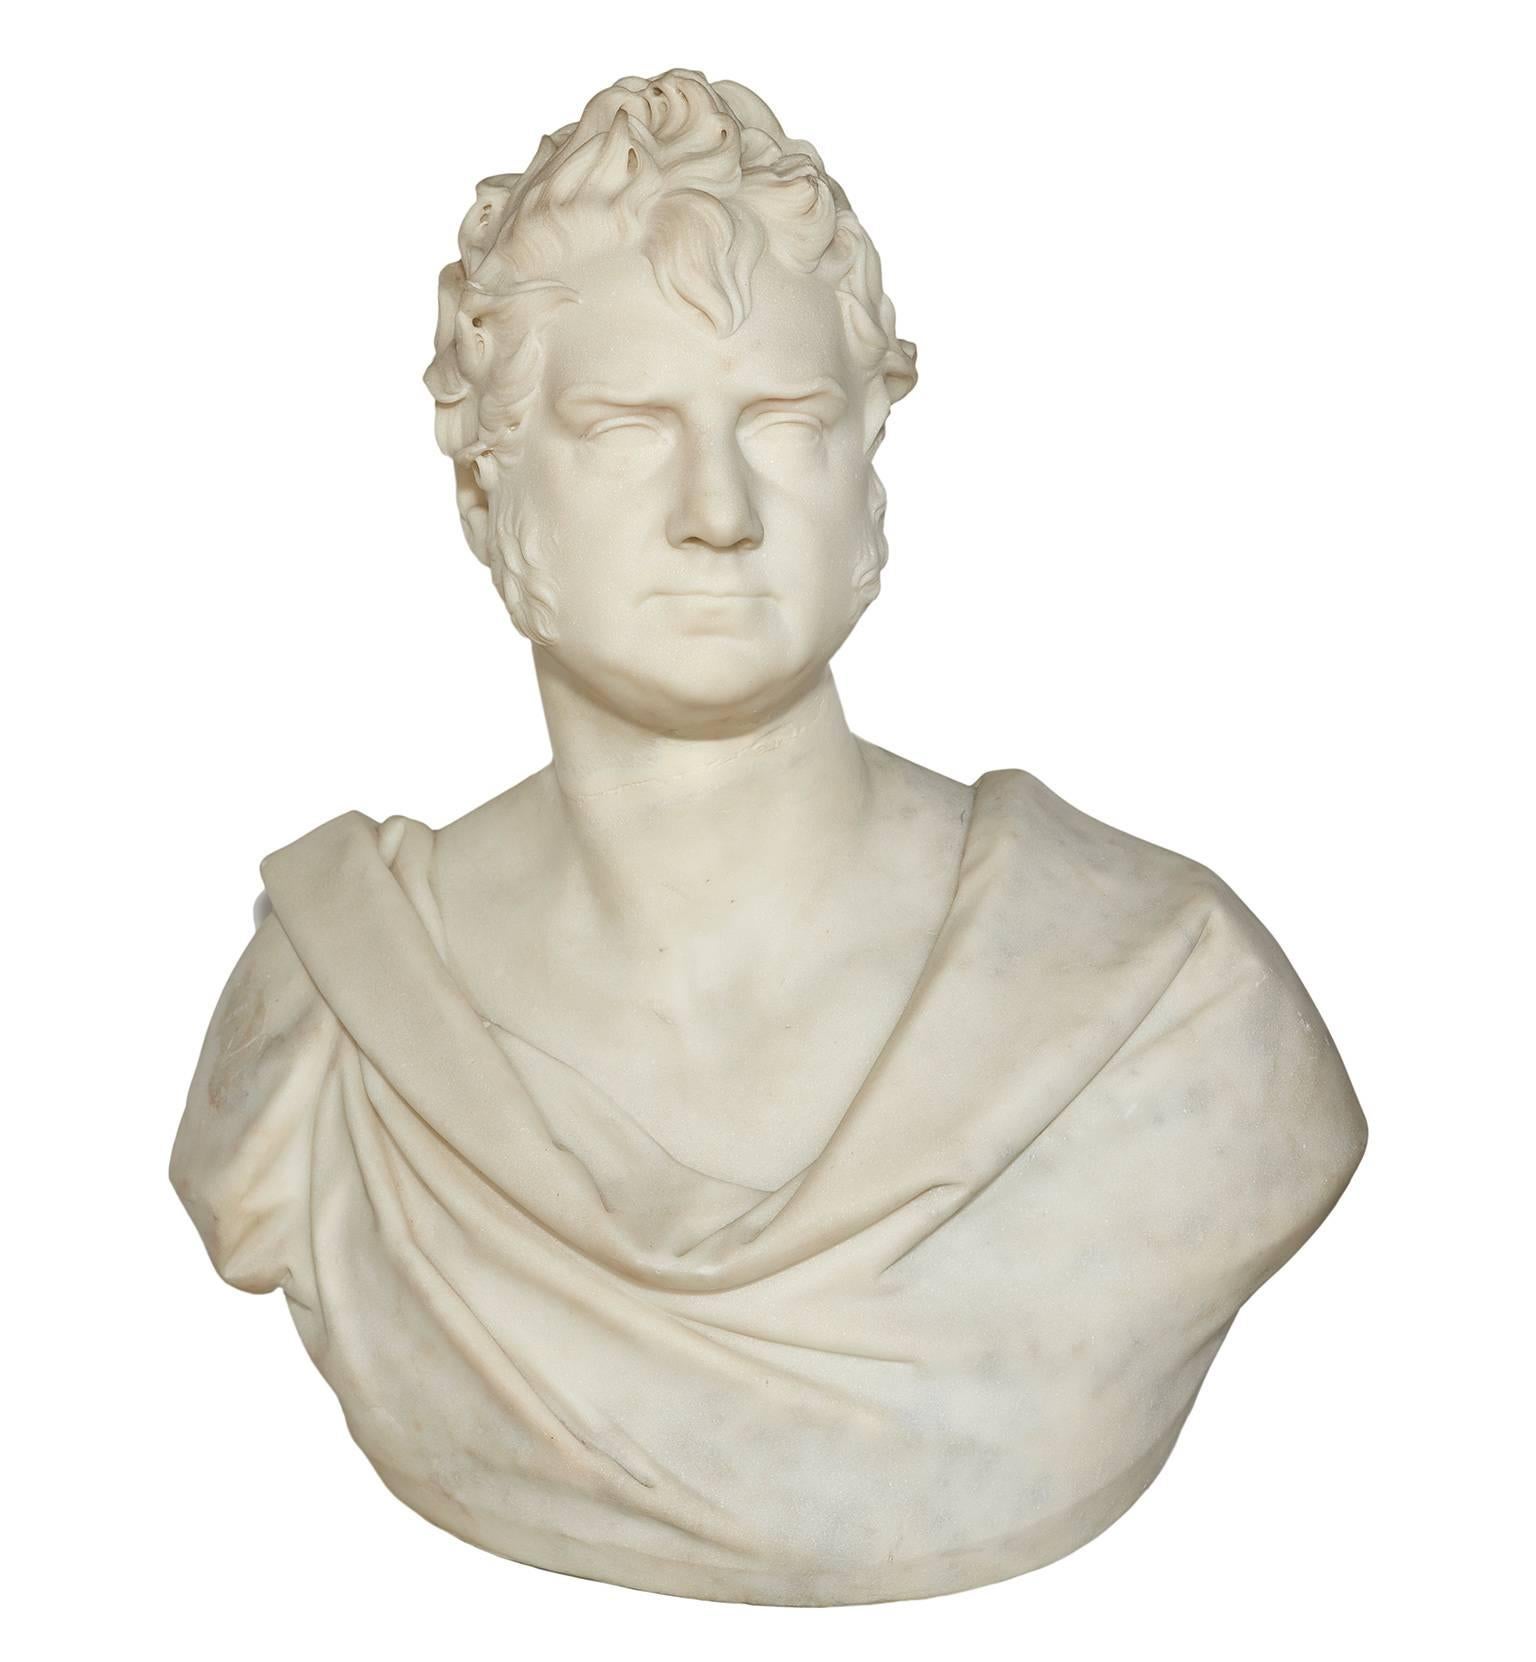 Thomas Earle (1810-1876) was a distinguished 19th century English sculptor who regularly exhibited at the Royal Academy and was honoured by that institution with a gold medal for his work. This magnificent portrait bust in the Roman style is